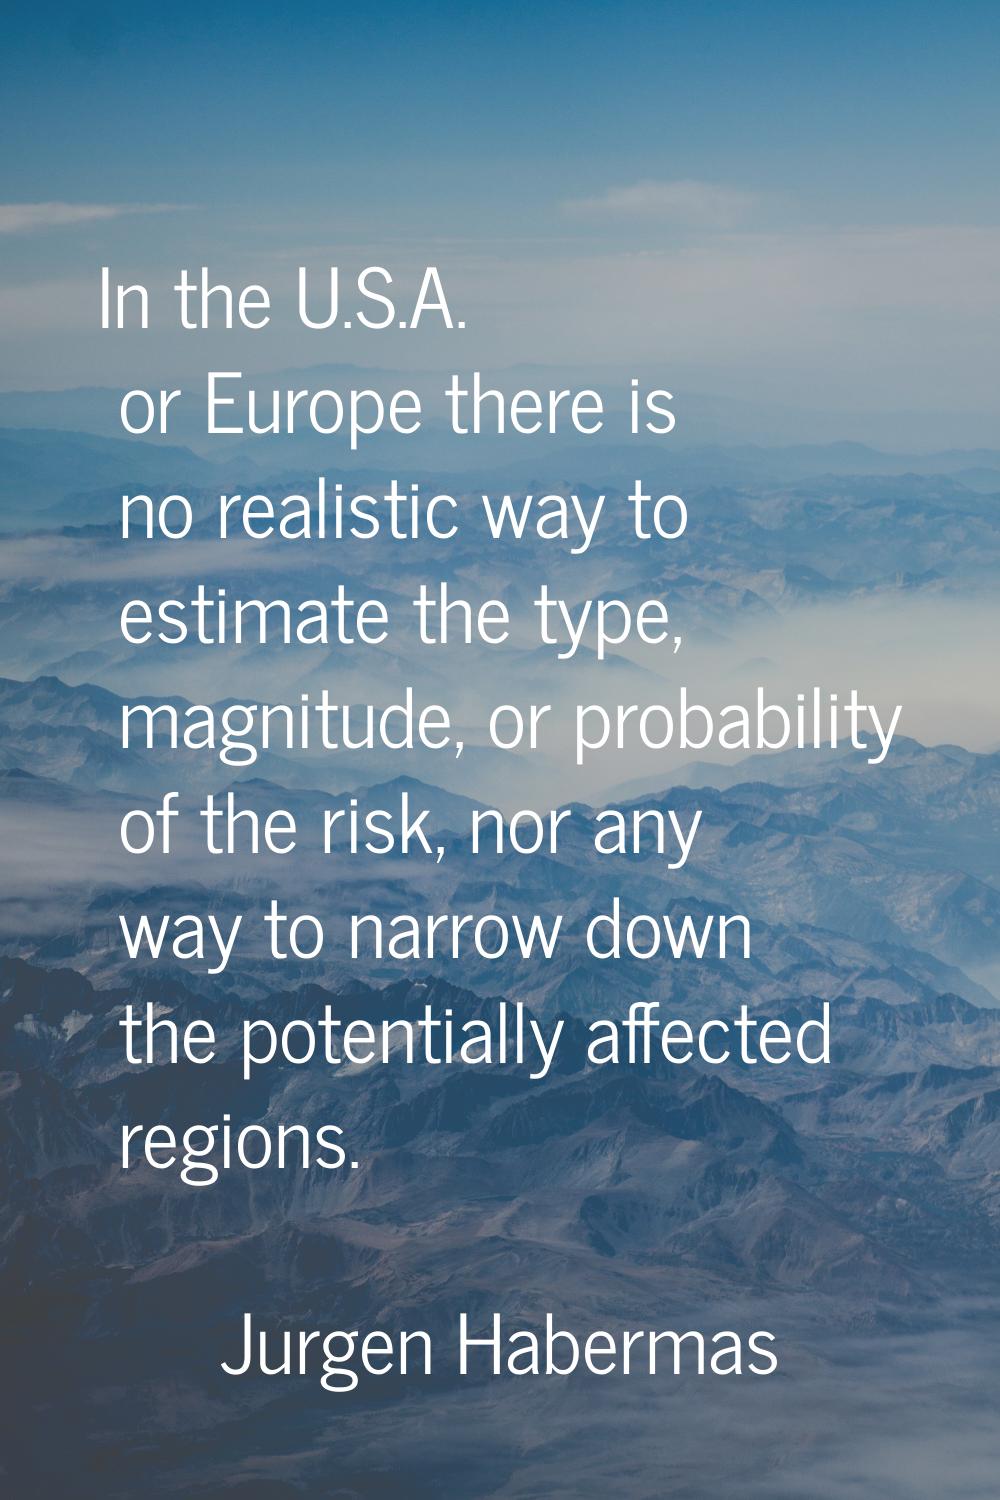 In the U.S.A. or Europe there is no realistic way to estimate the type, magnitude, or probability o